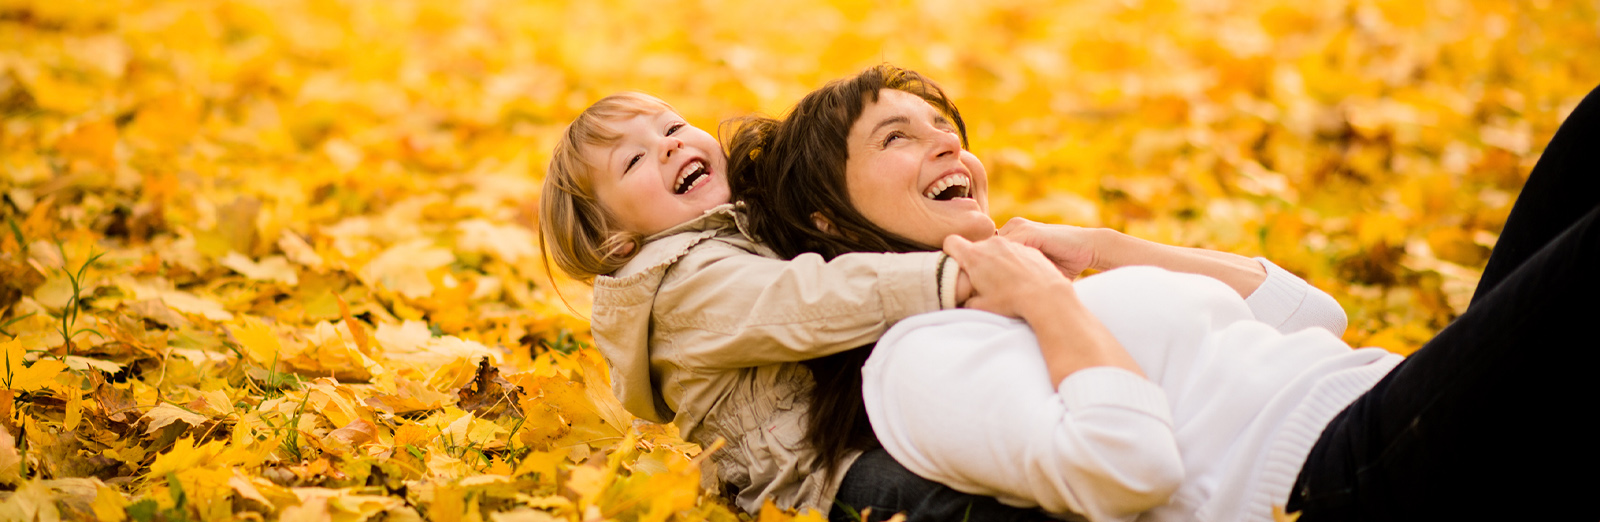 mother-and-daughter-in-leaves-1600x522.jpg